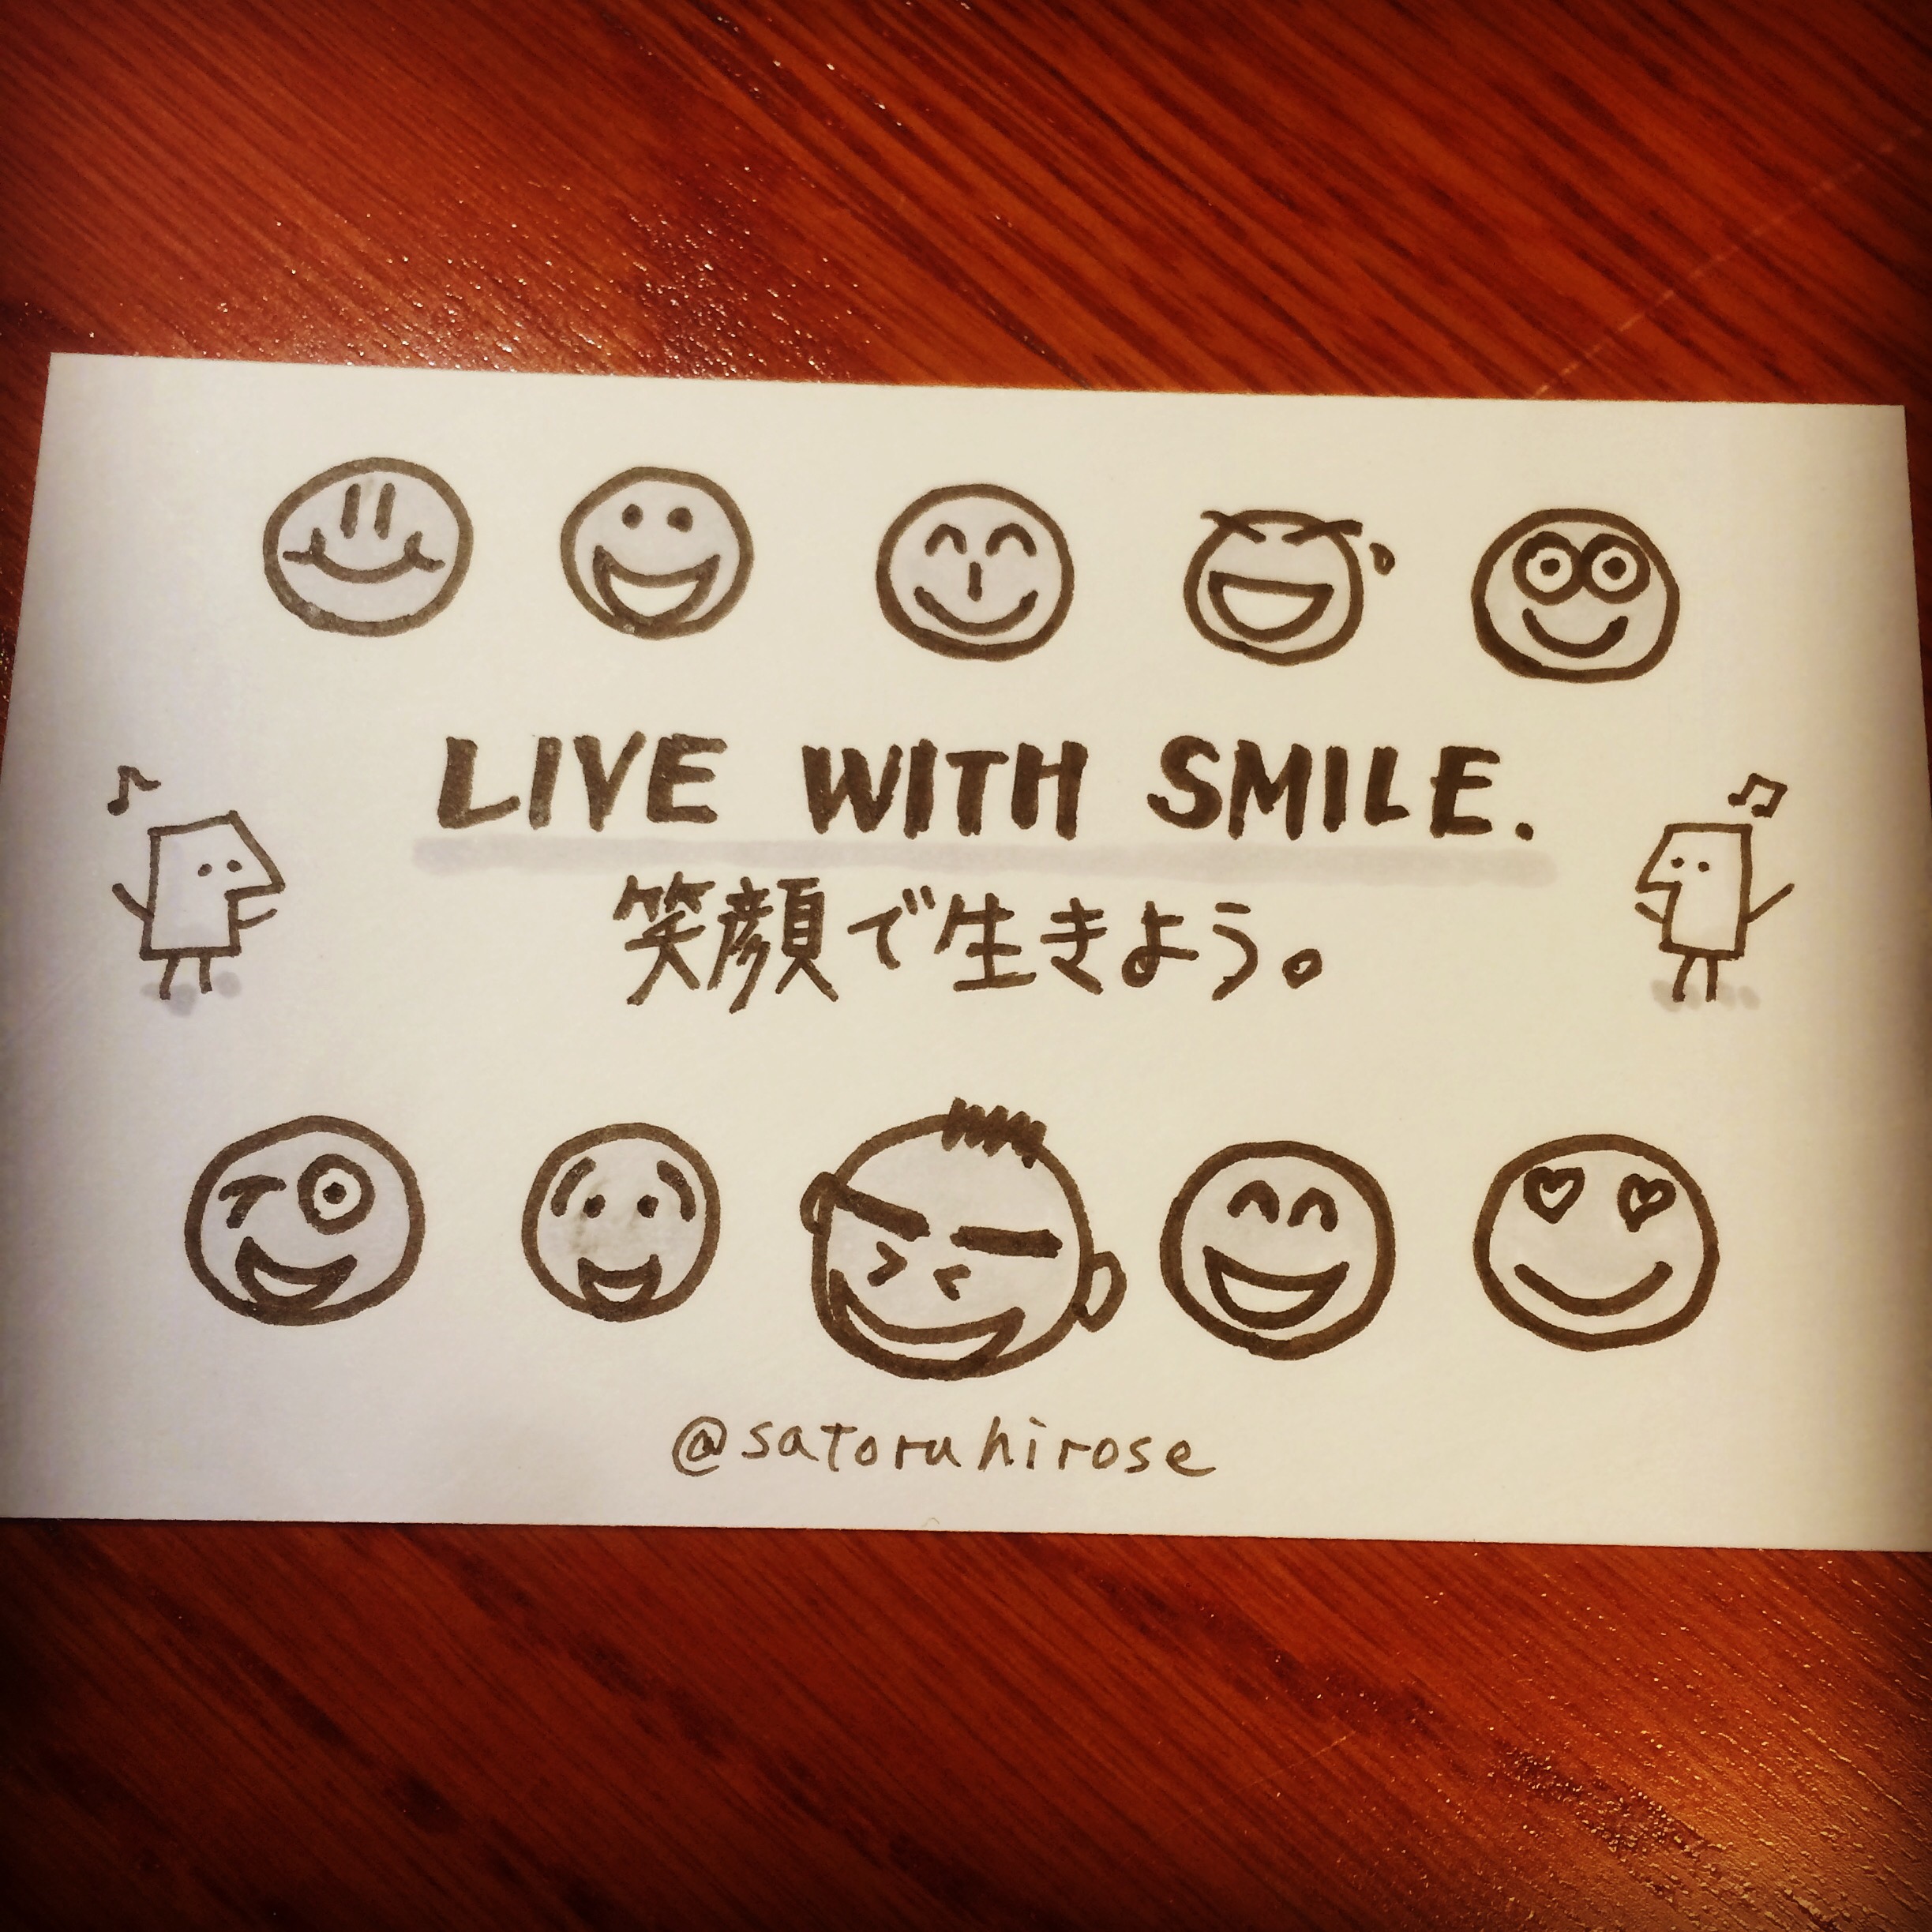 Live with smile.